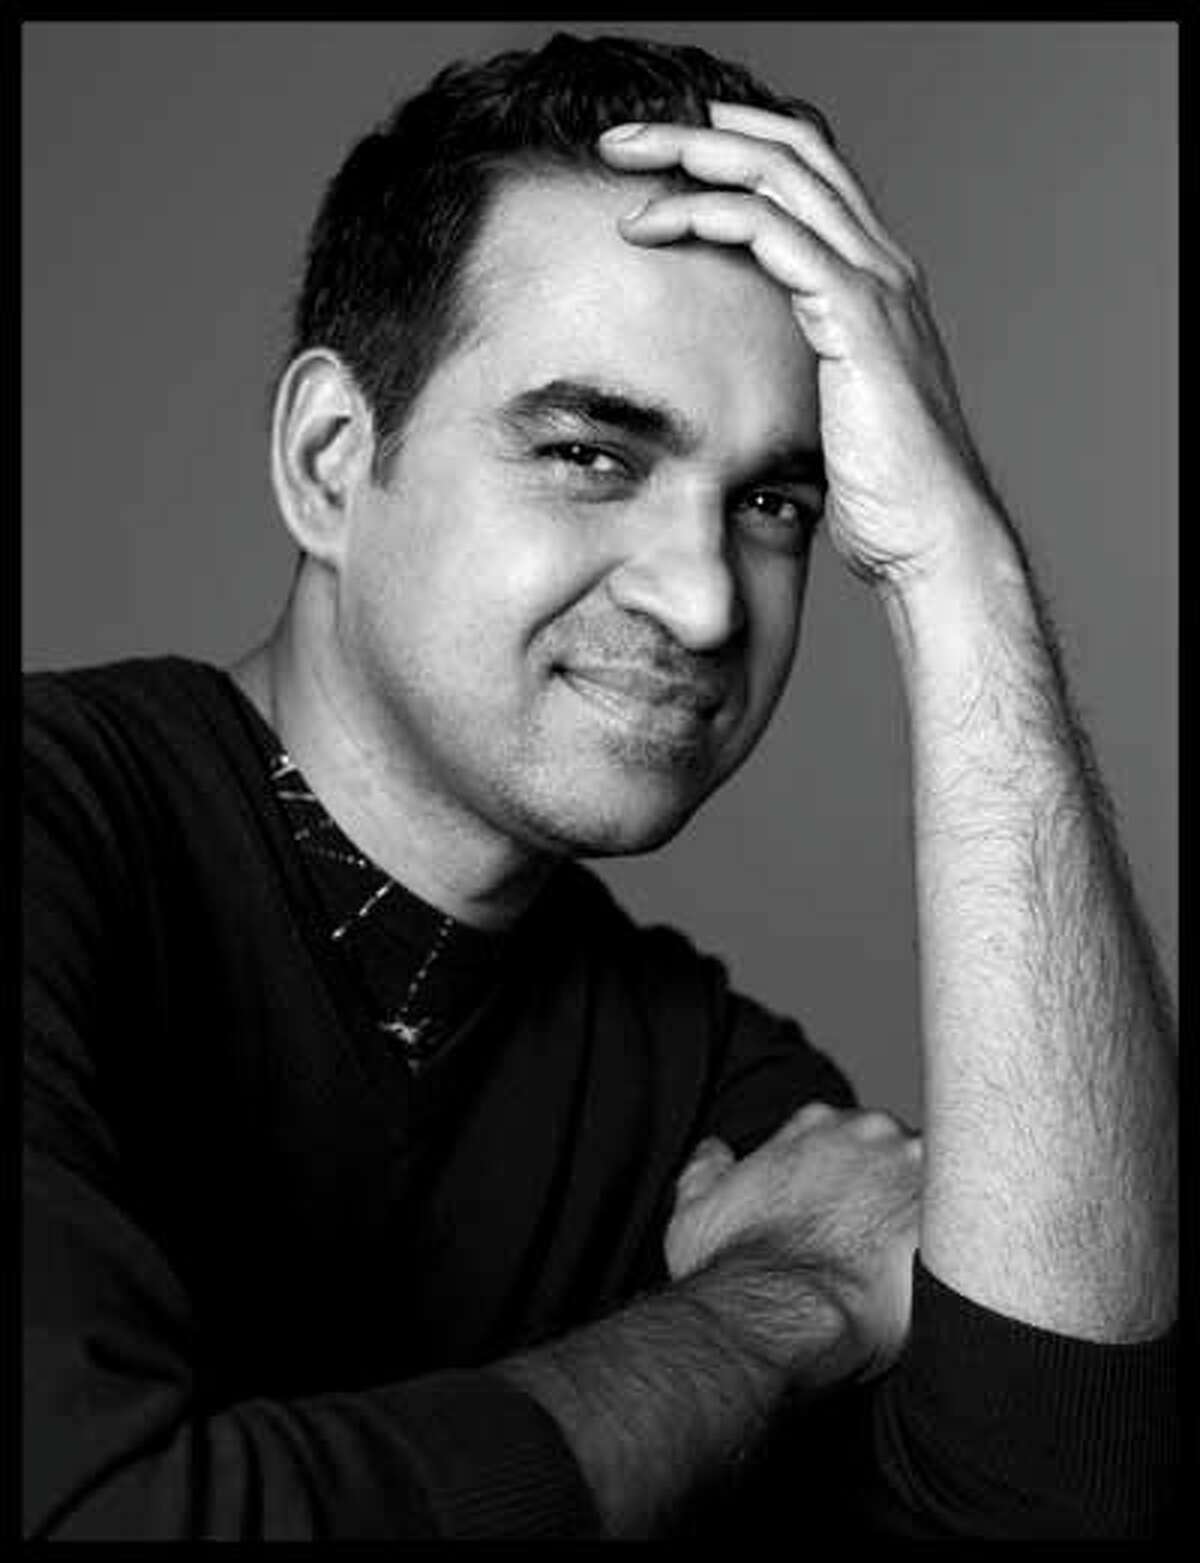 Designer Bibhu Mohapatra is showing his collection at Fashion Houston 2013.